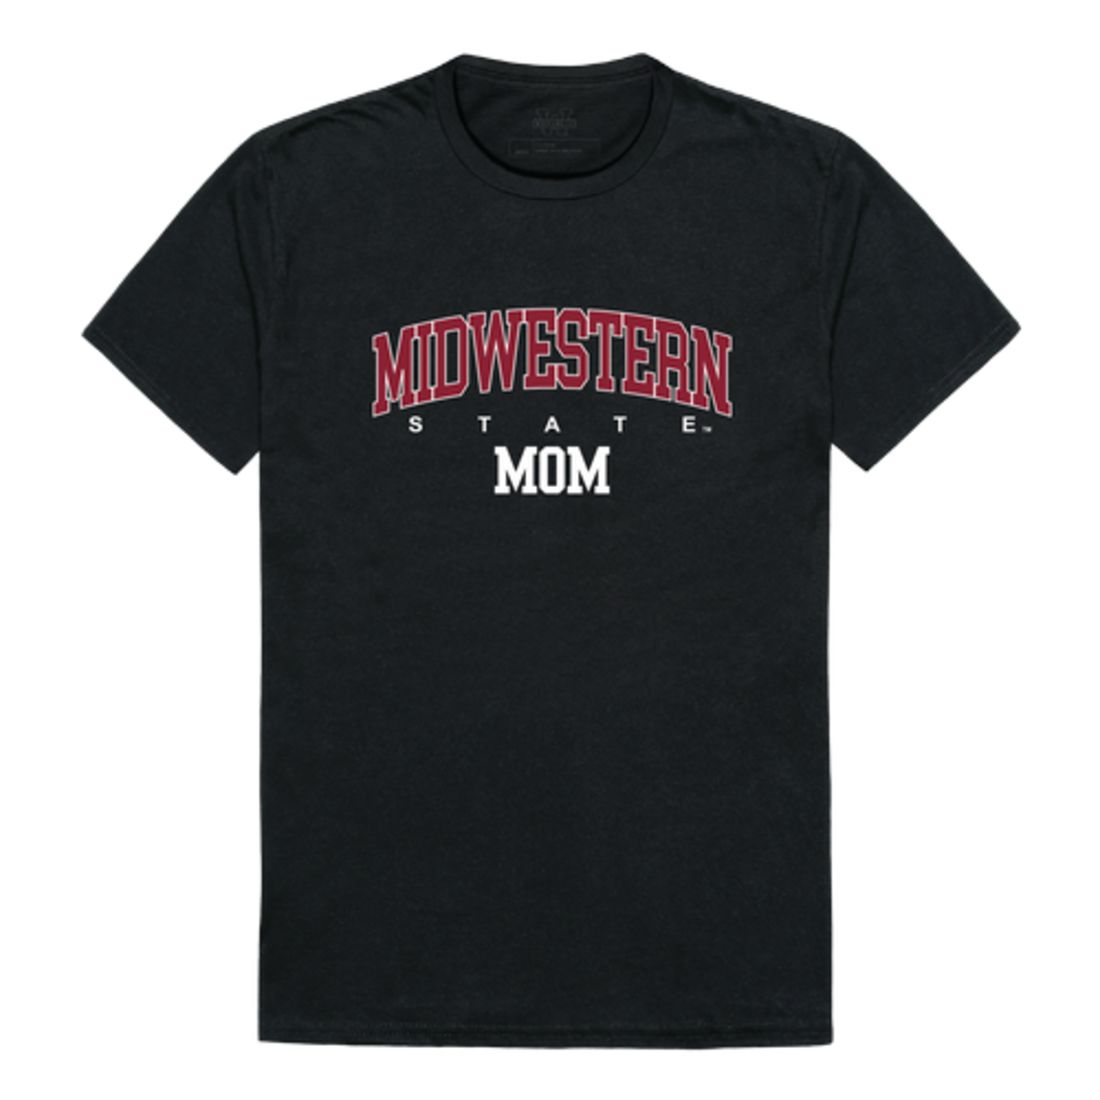 Midwestern State University Mustangs Mom T-Shirt